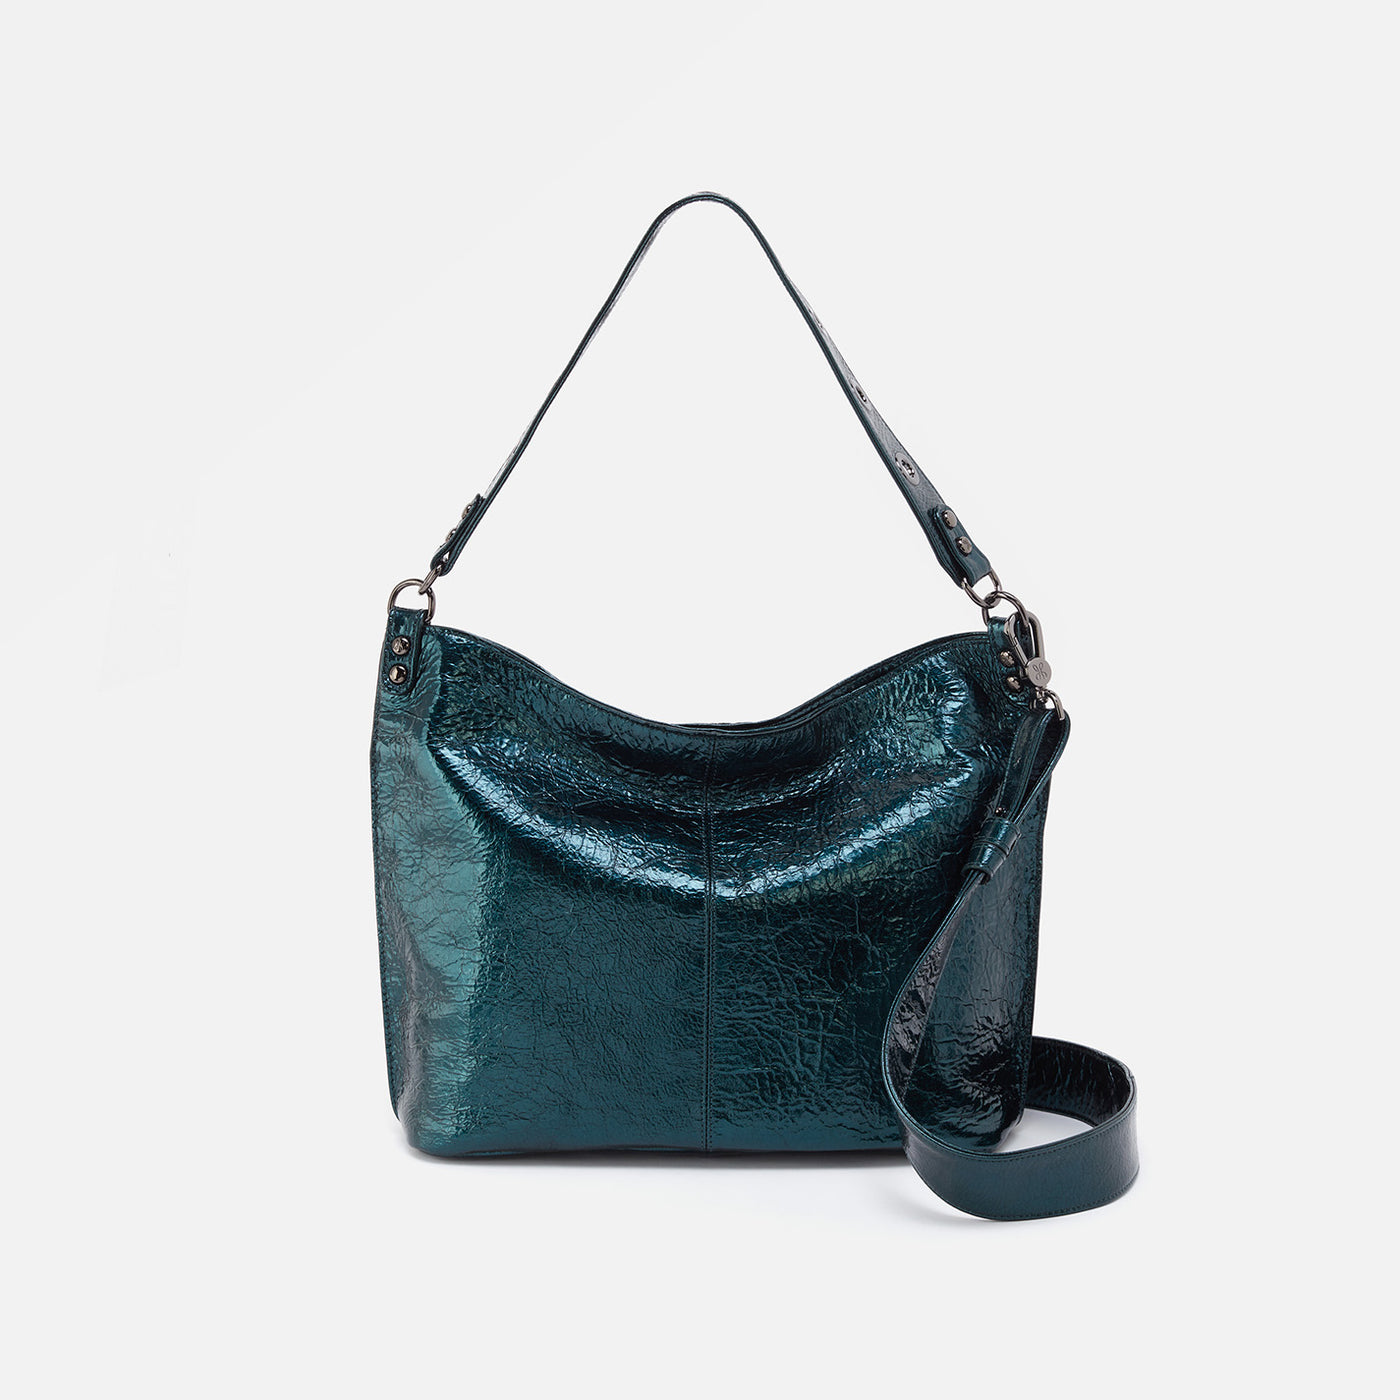 Pier Shoulder Bag in Patent Leather - Spruce Patent